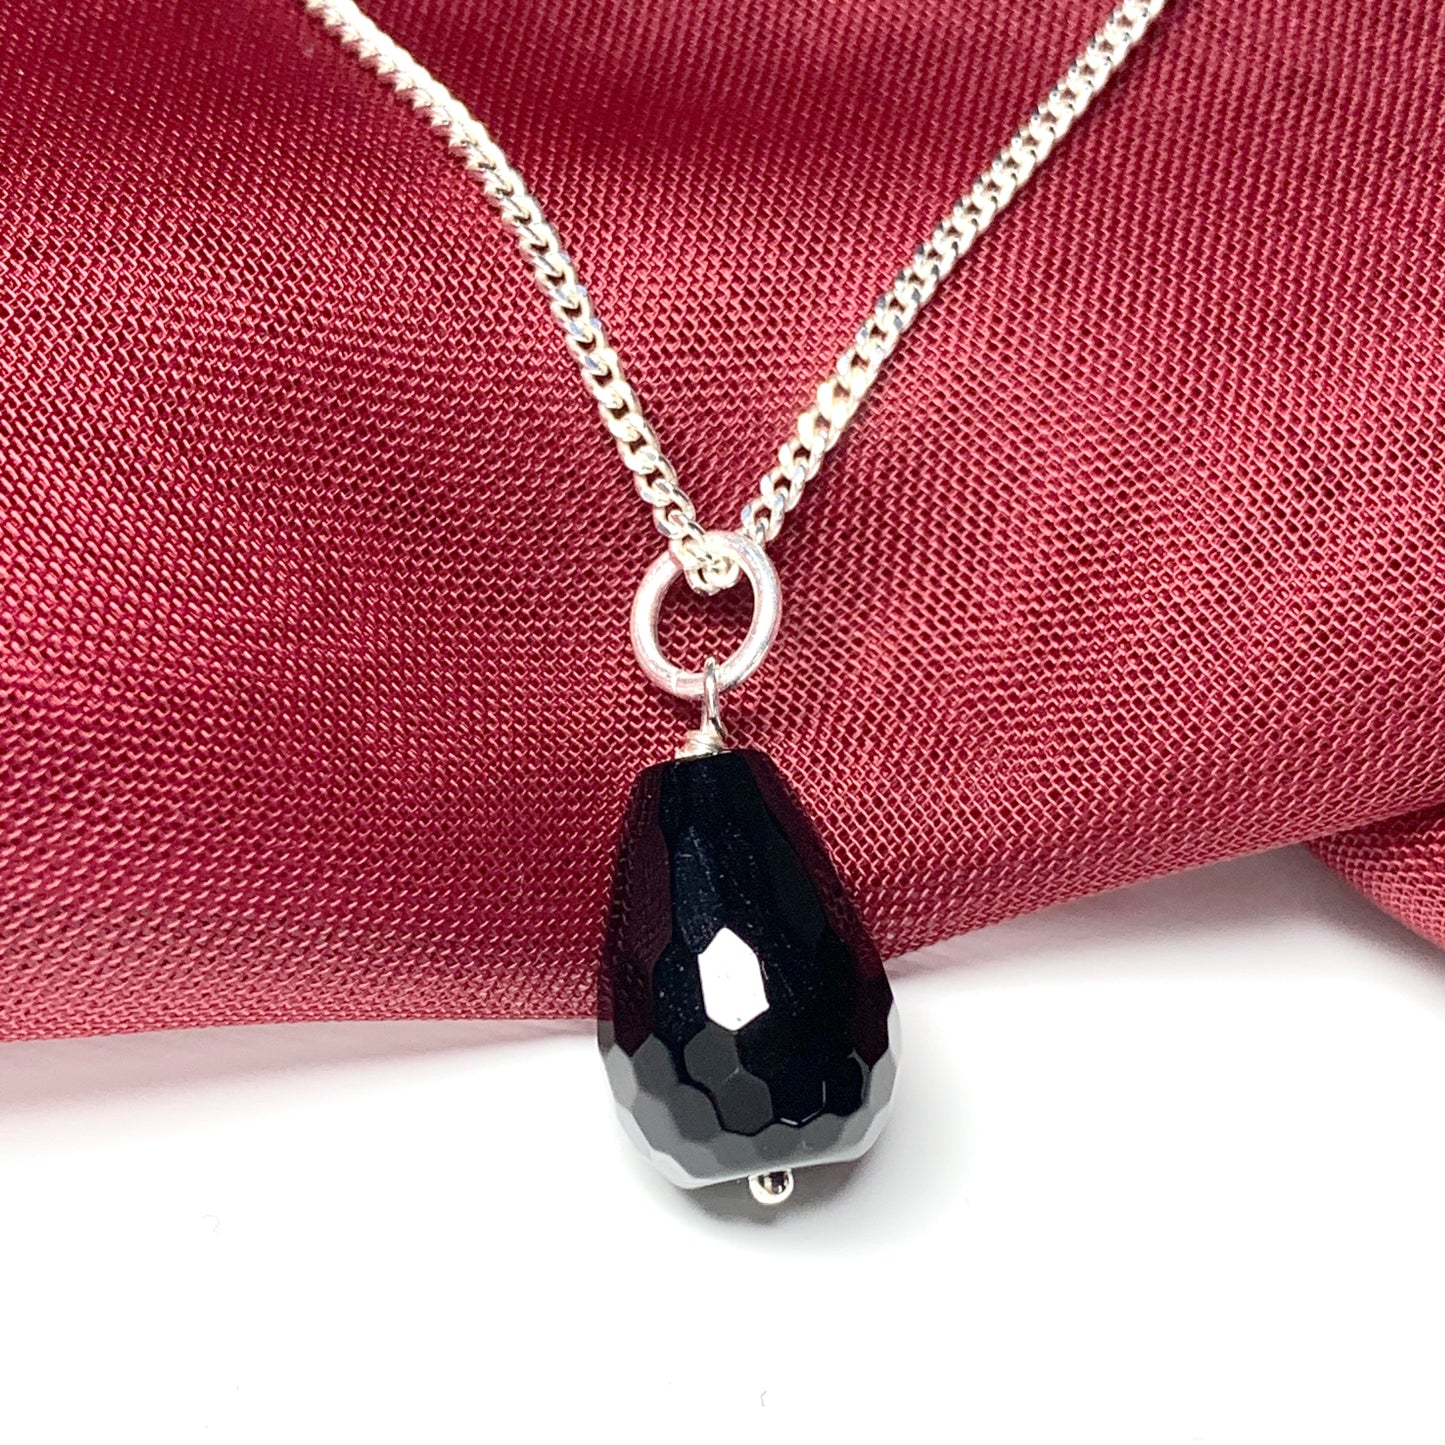 Tear Drop Silver Pear Shaped Onyx Necklace Pendent